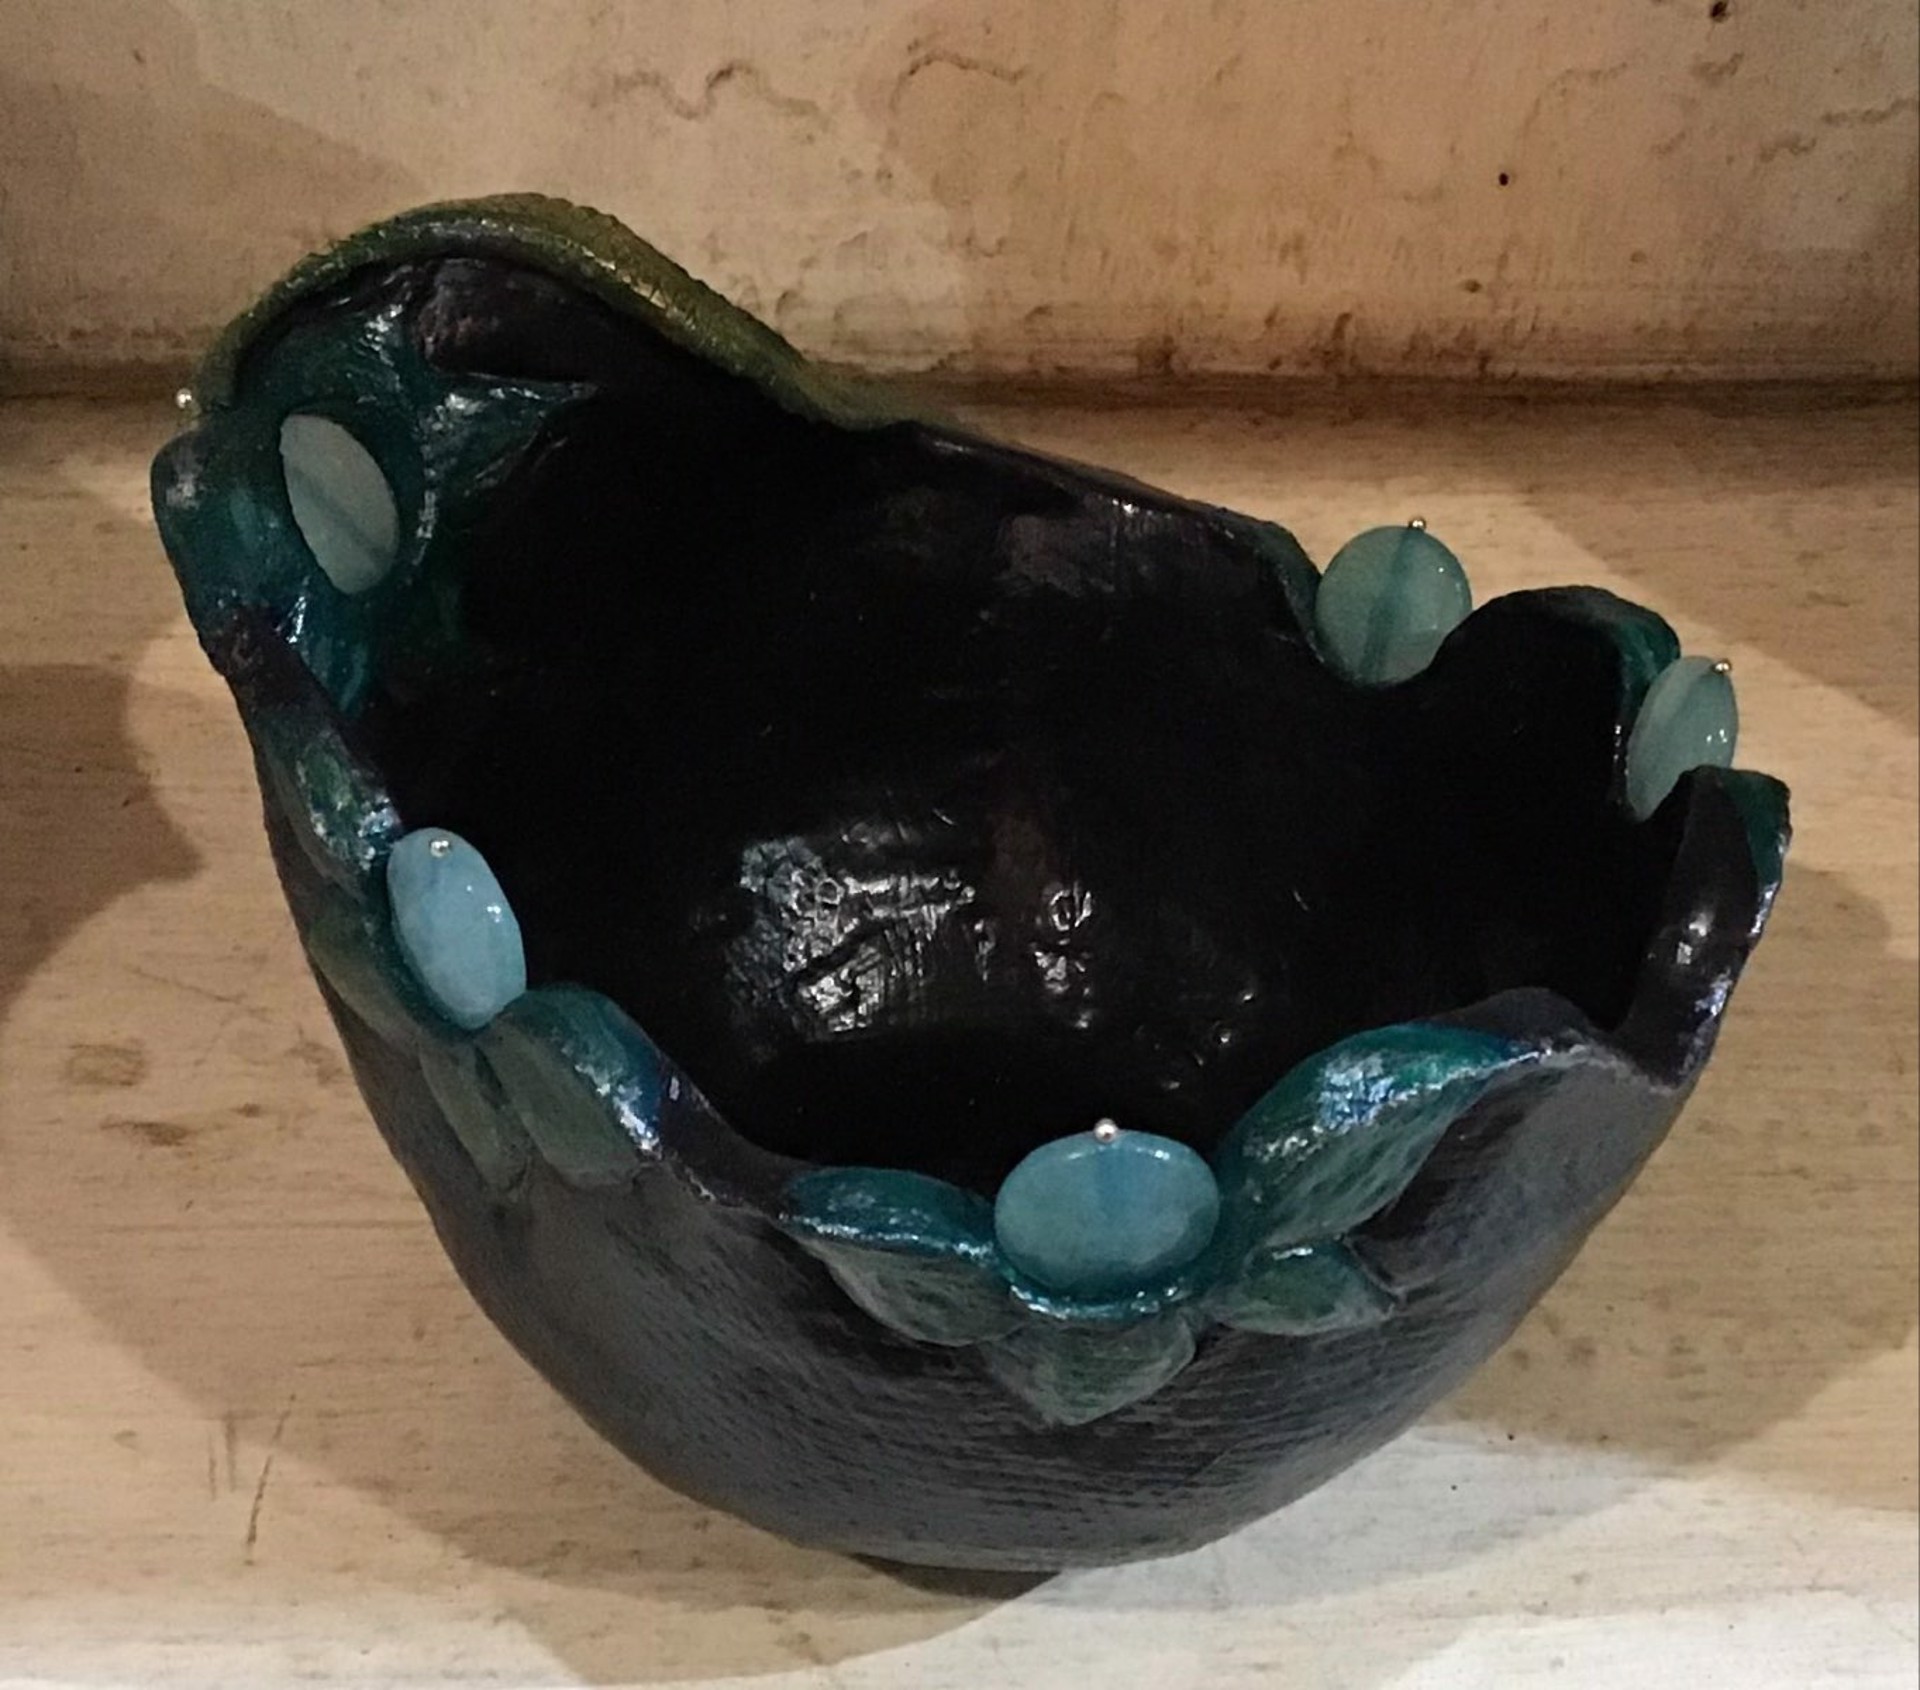 Black Bowl, Green Flowers and Blue Stones by Nancy Burns